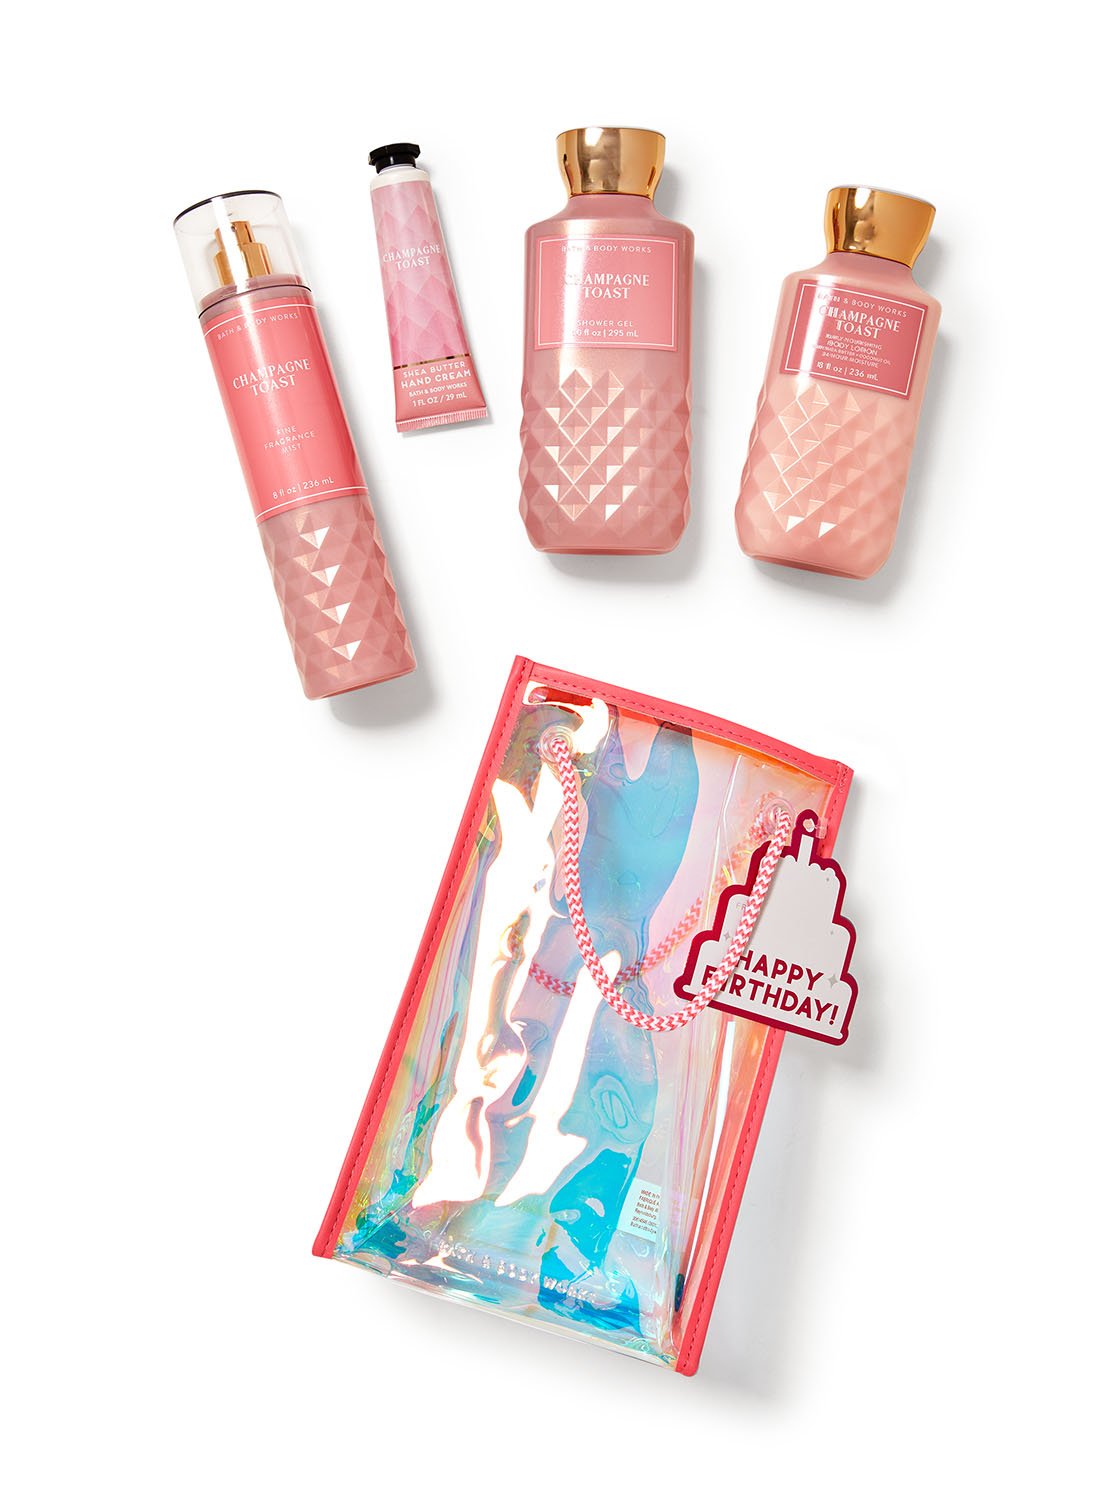 Champagne Toast Gift Bag Set | Bath and Body Works